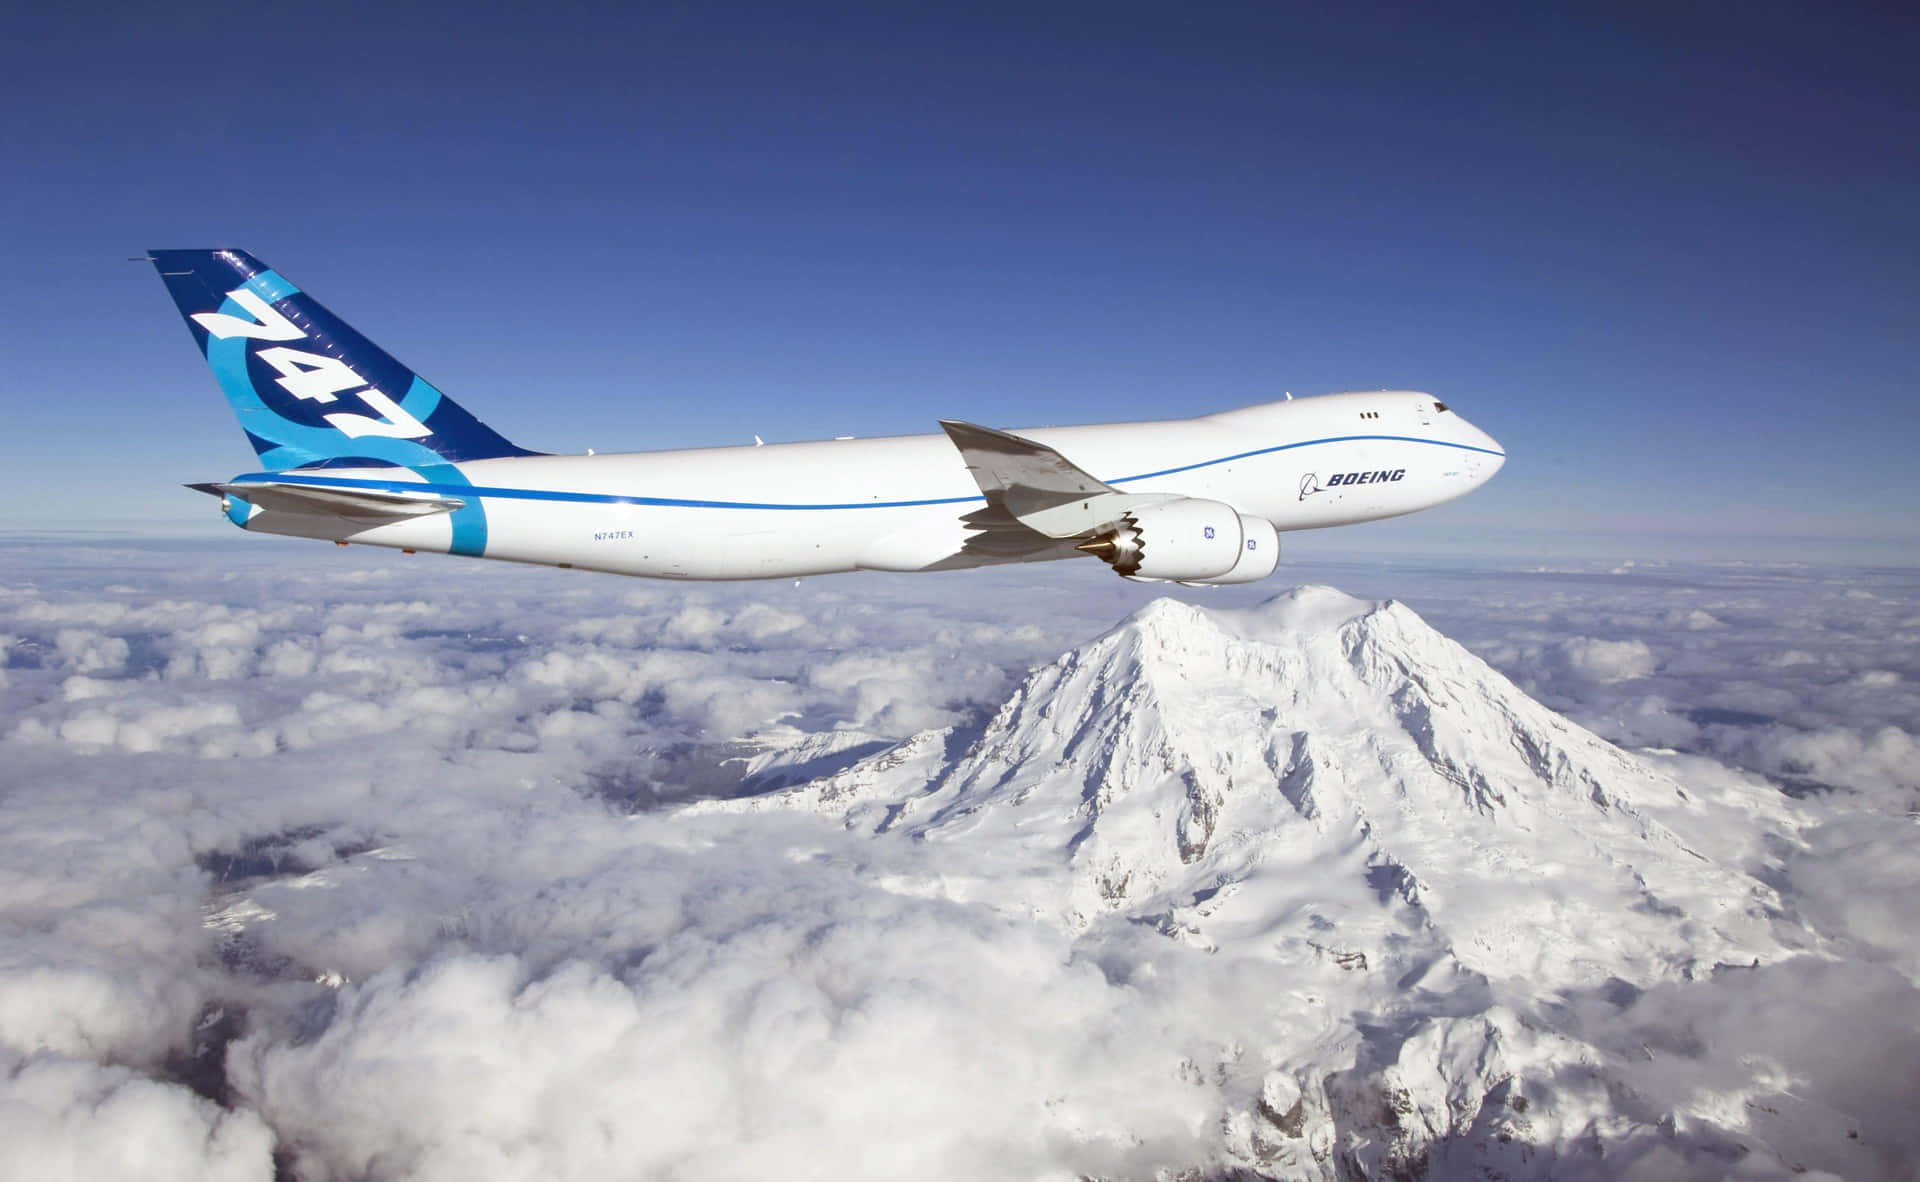 Boeing Aircraft Over Mountain Peaks Wallpaper